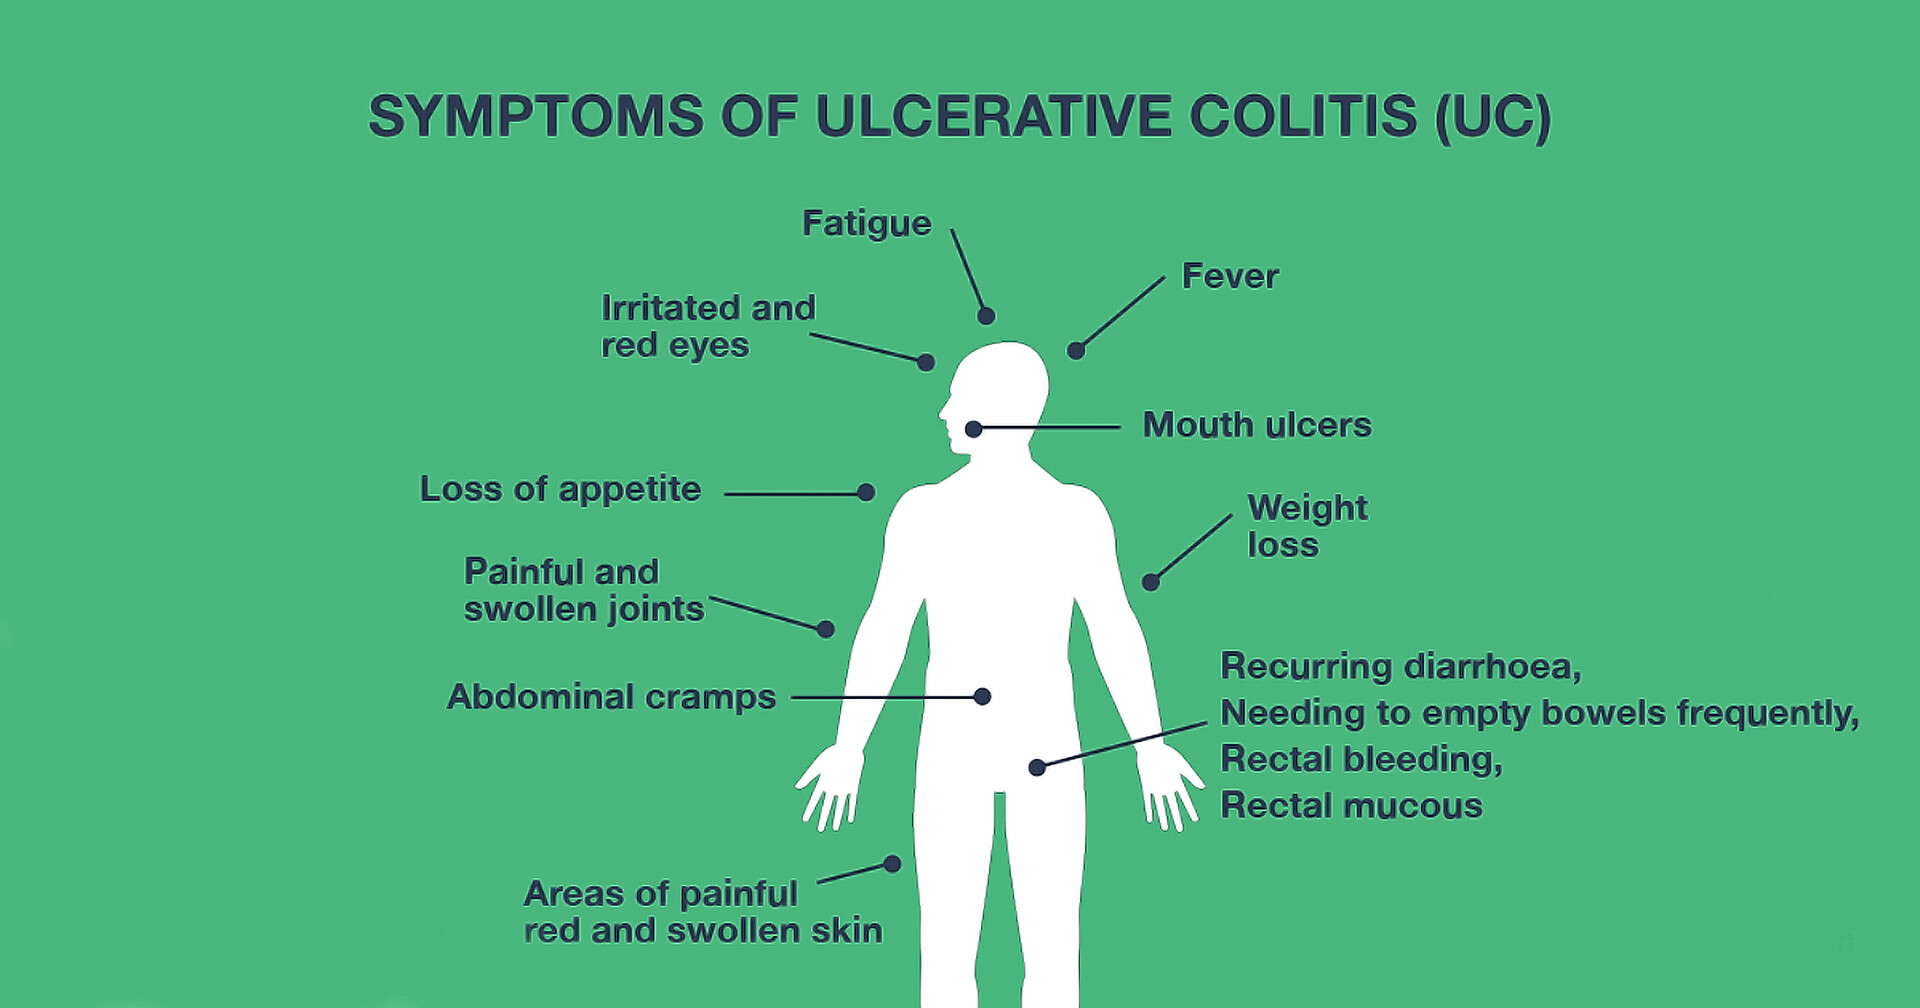 Ulcerative Colitis Pain Location, Frequency, and Other Symptoms